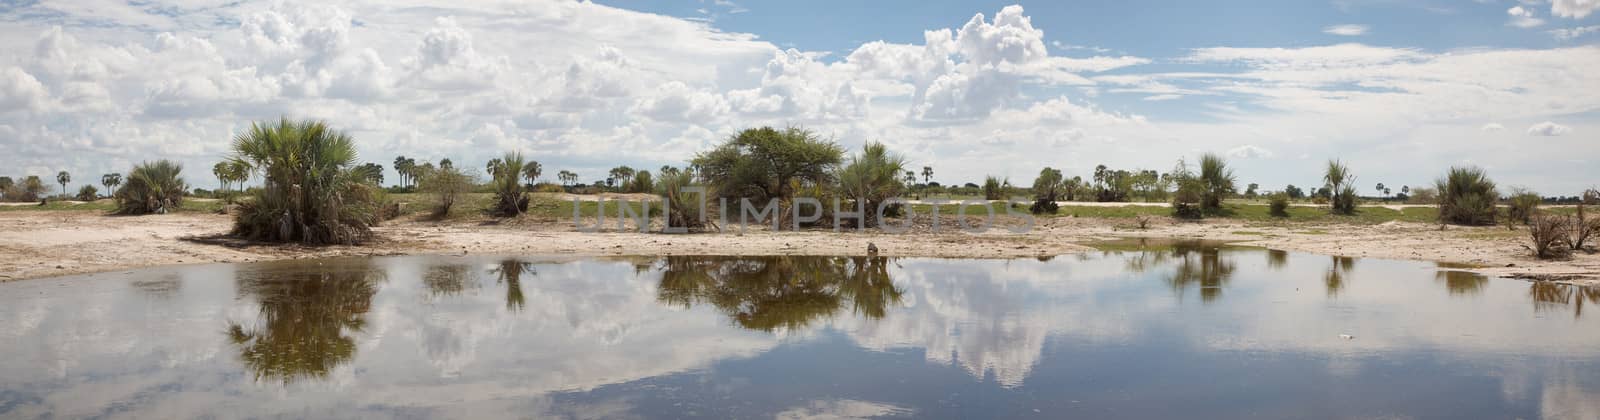 African landscape with trees reflected in water, Kaokoland, Namibia